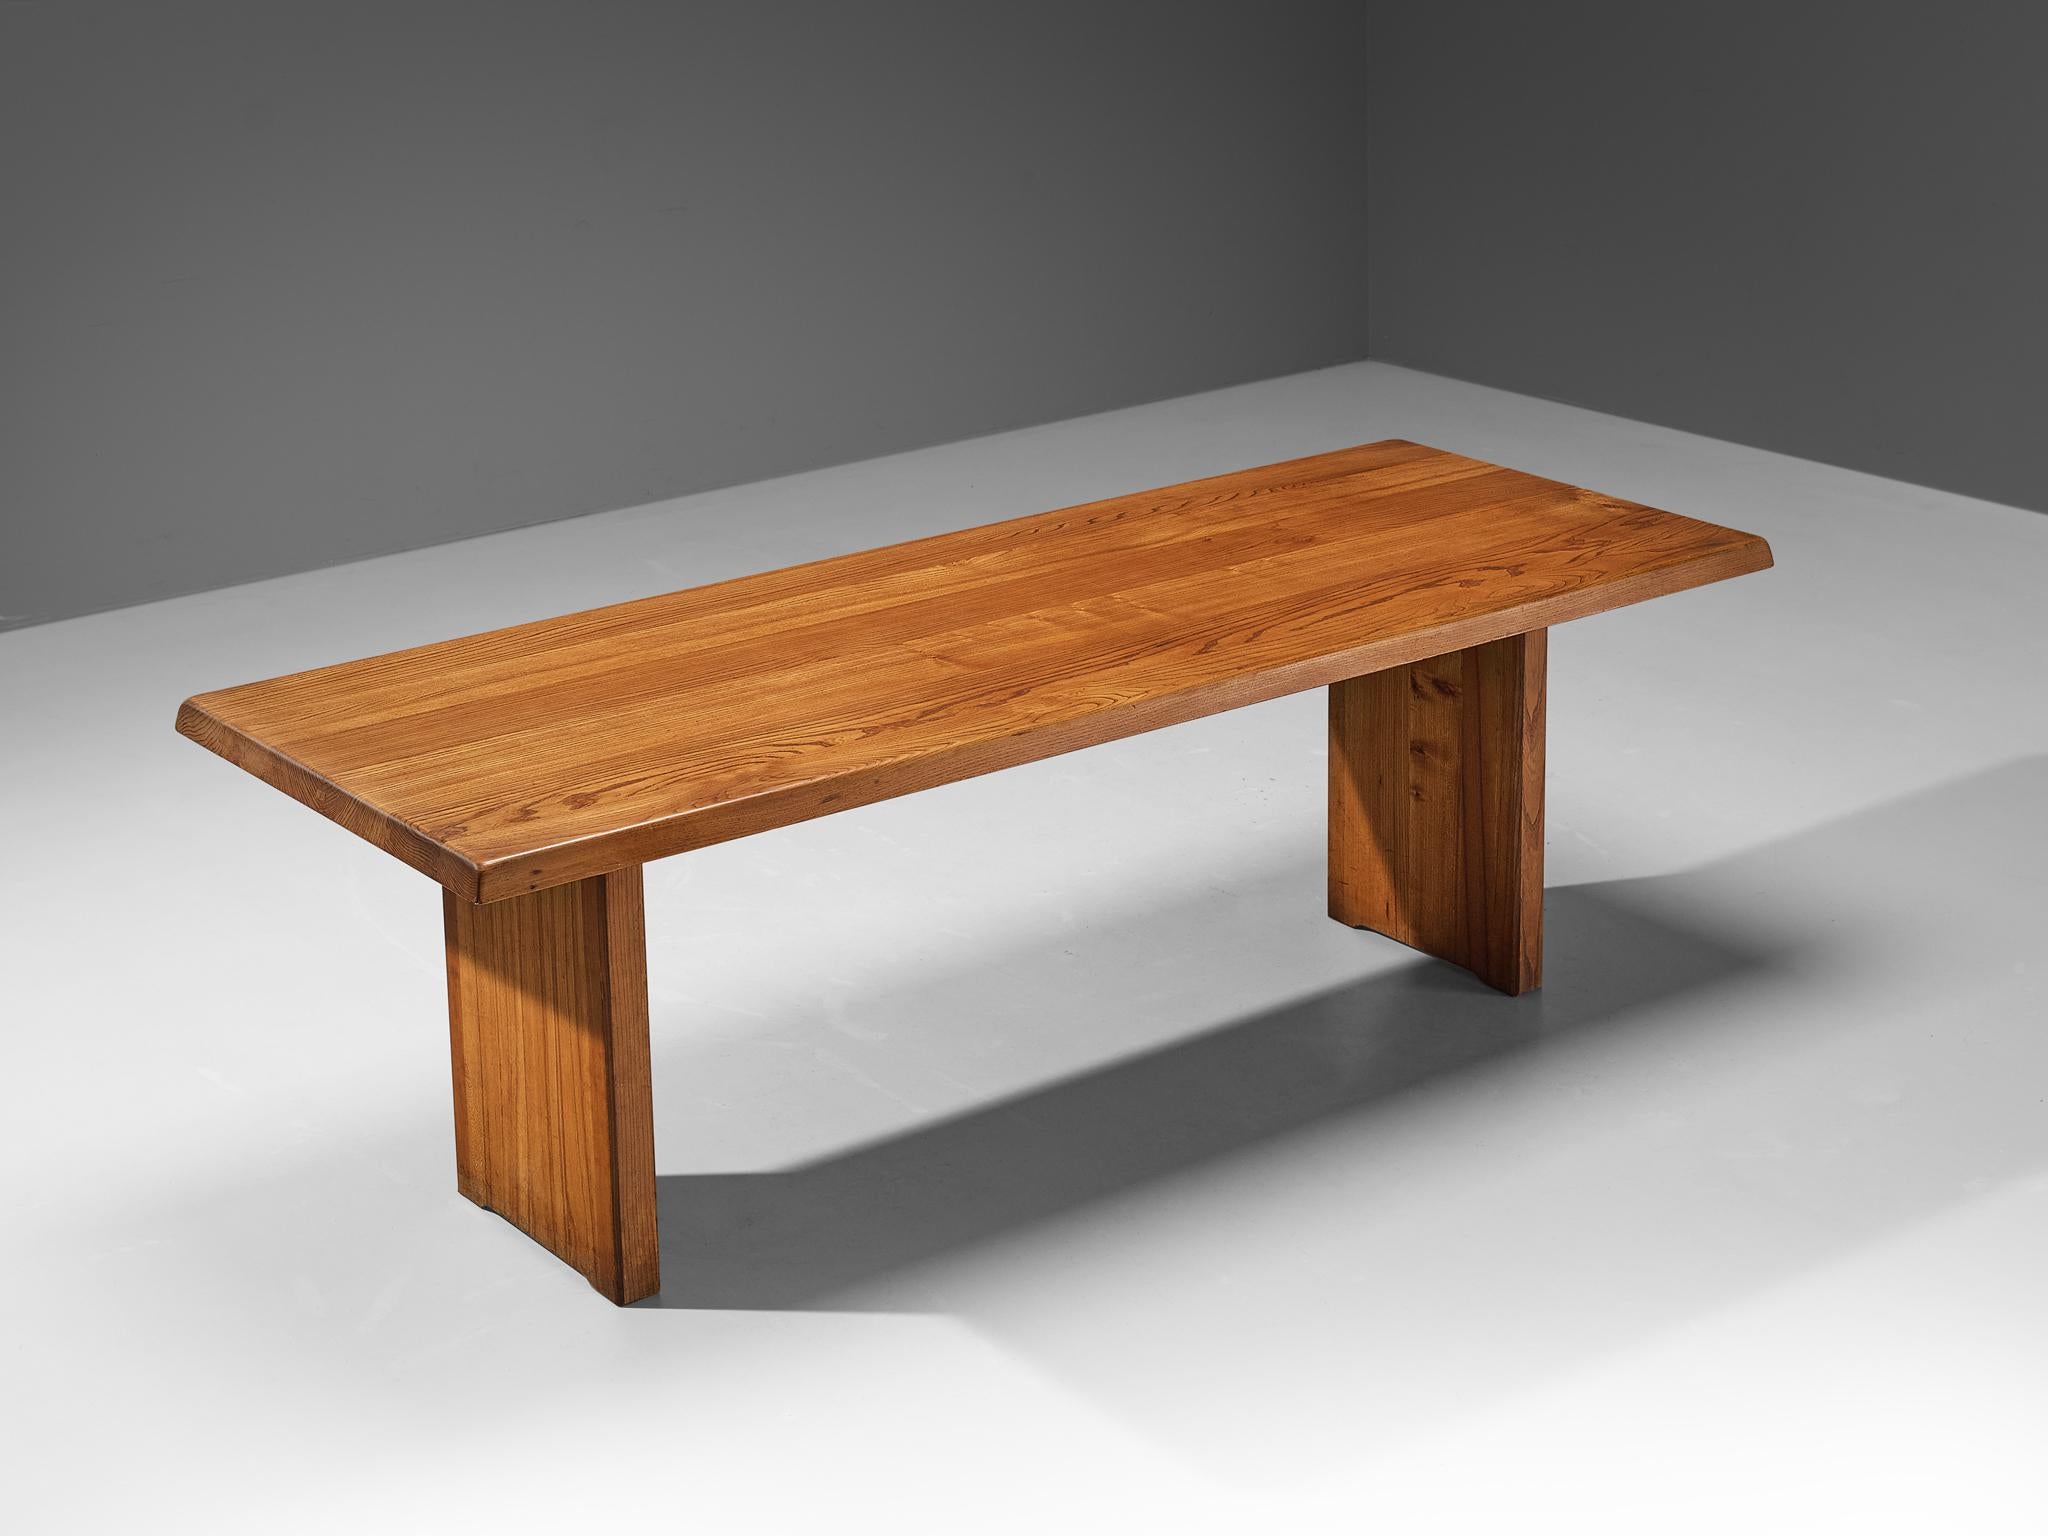 Pierre Chapo, dining table model 'T14D', elm, France, design 1964

This T14D dining table is one of the early editions designed by Pierre Chapo, known for his hallmark use of solid elmwood and a commitment to pure and clean design and construction